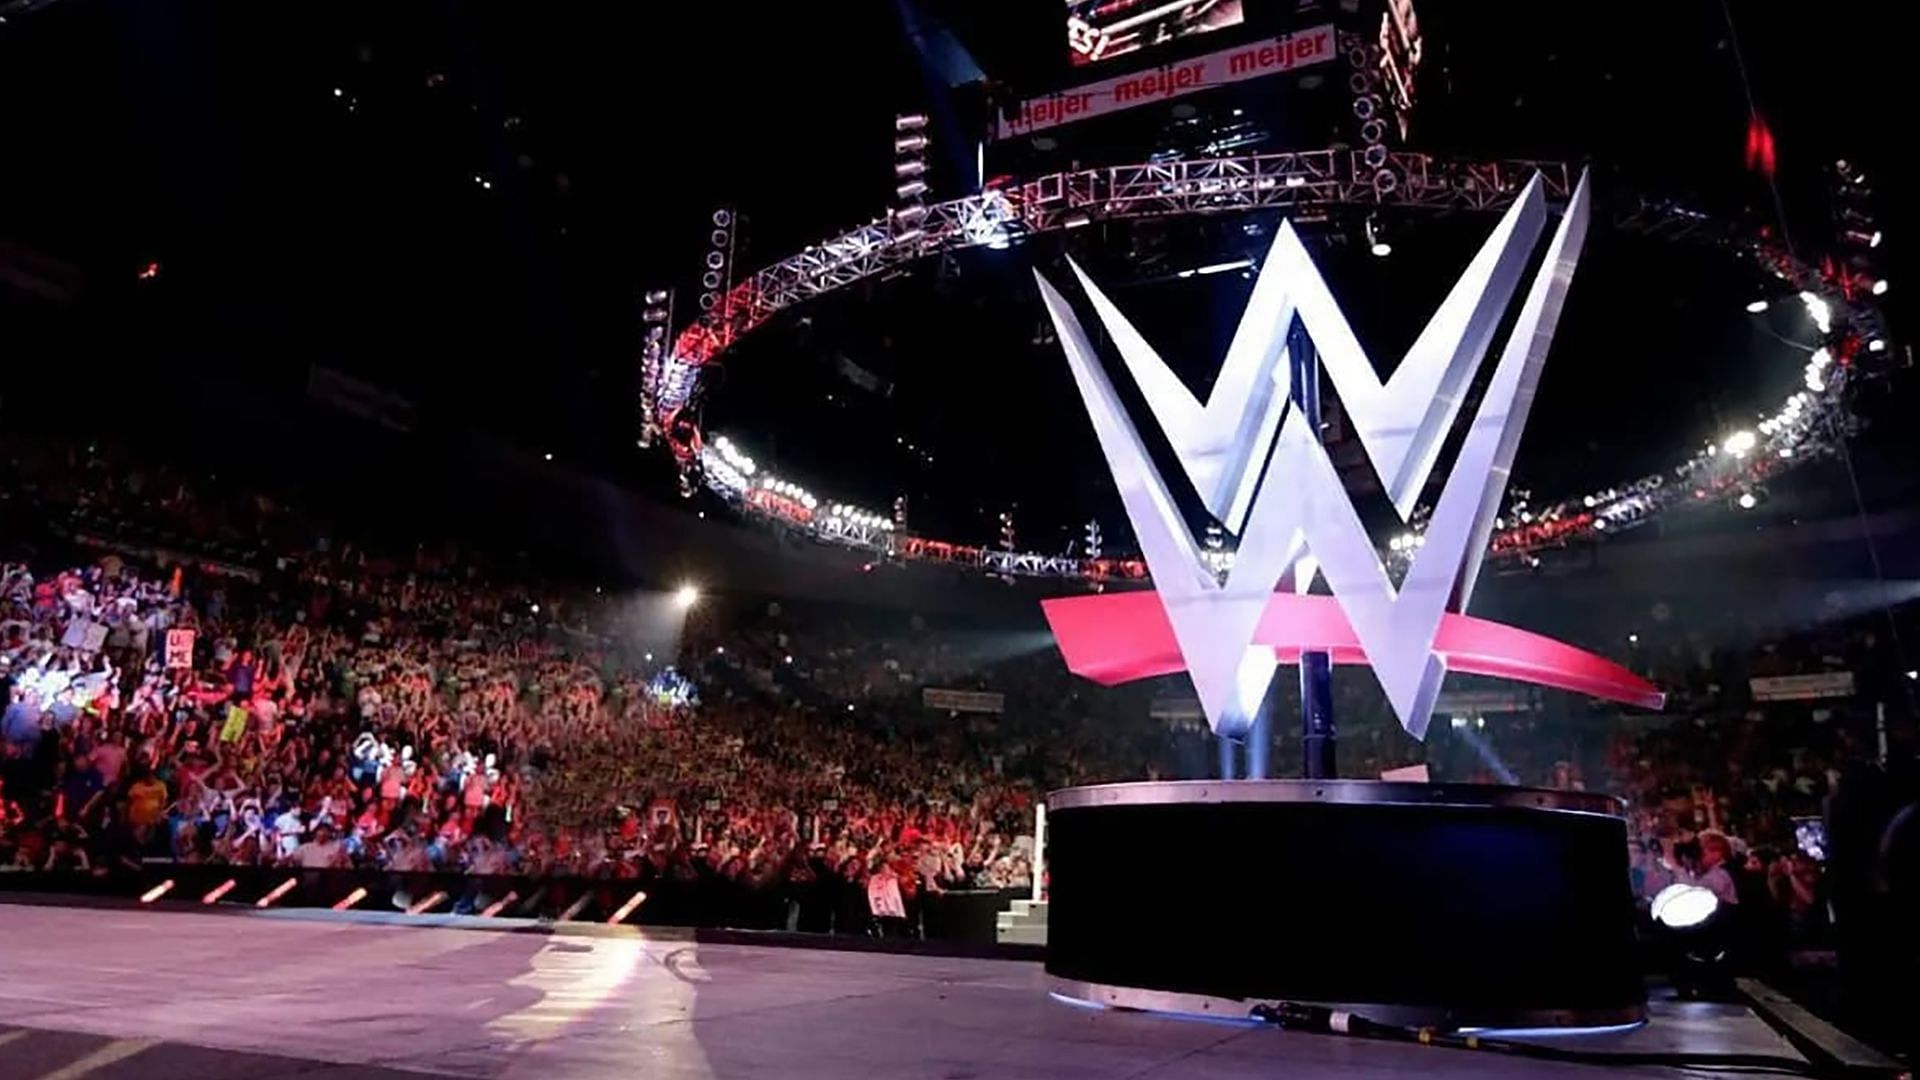 The WWE logo and stage set on display in arena